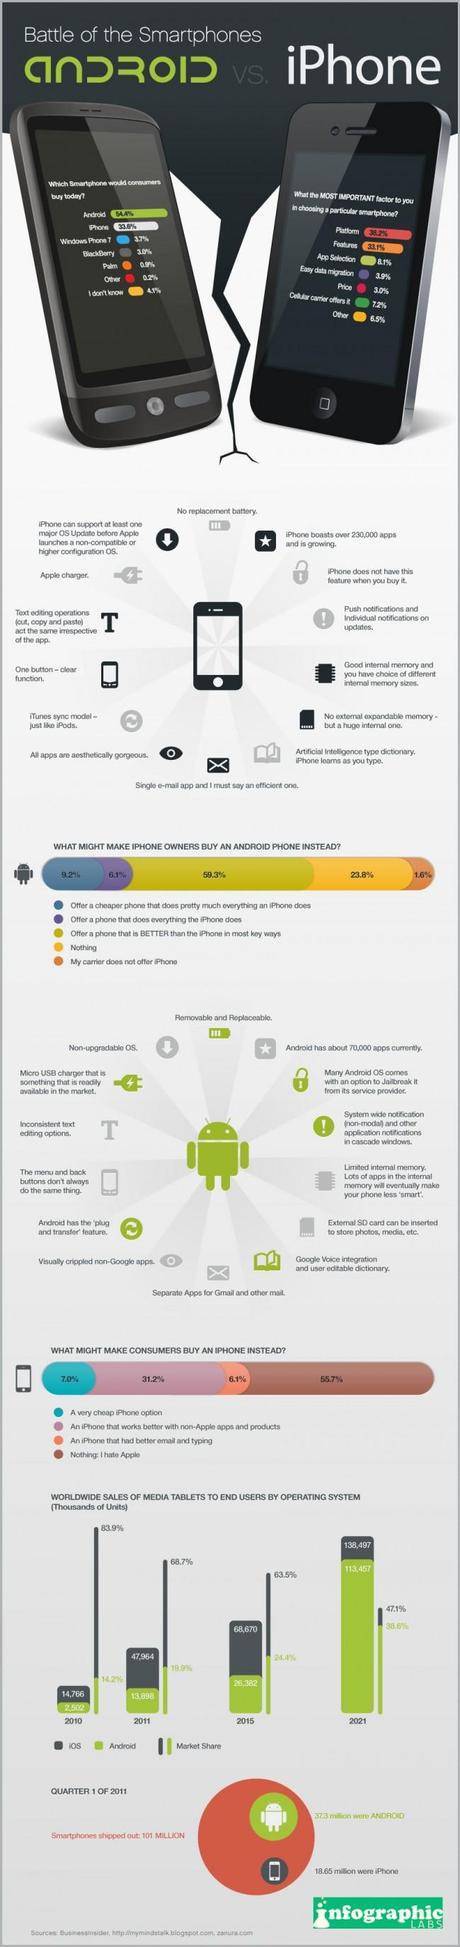 Android contro iPhone [Infografica]